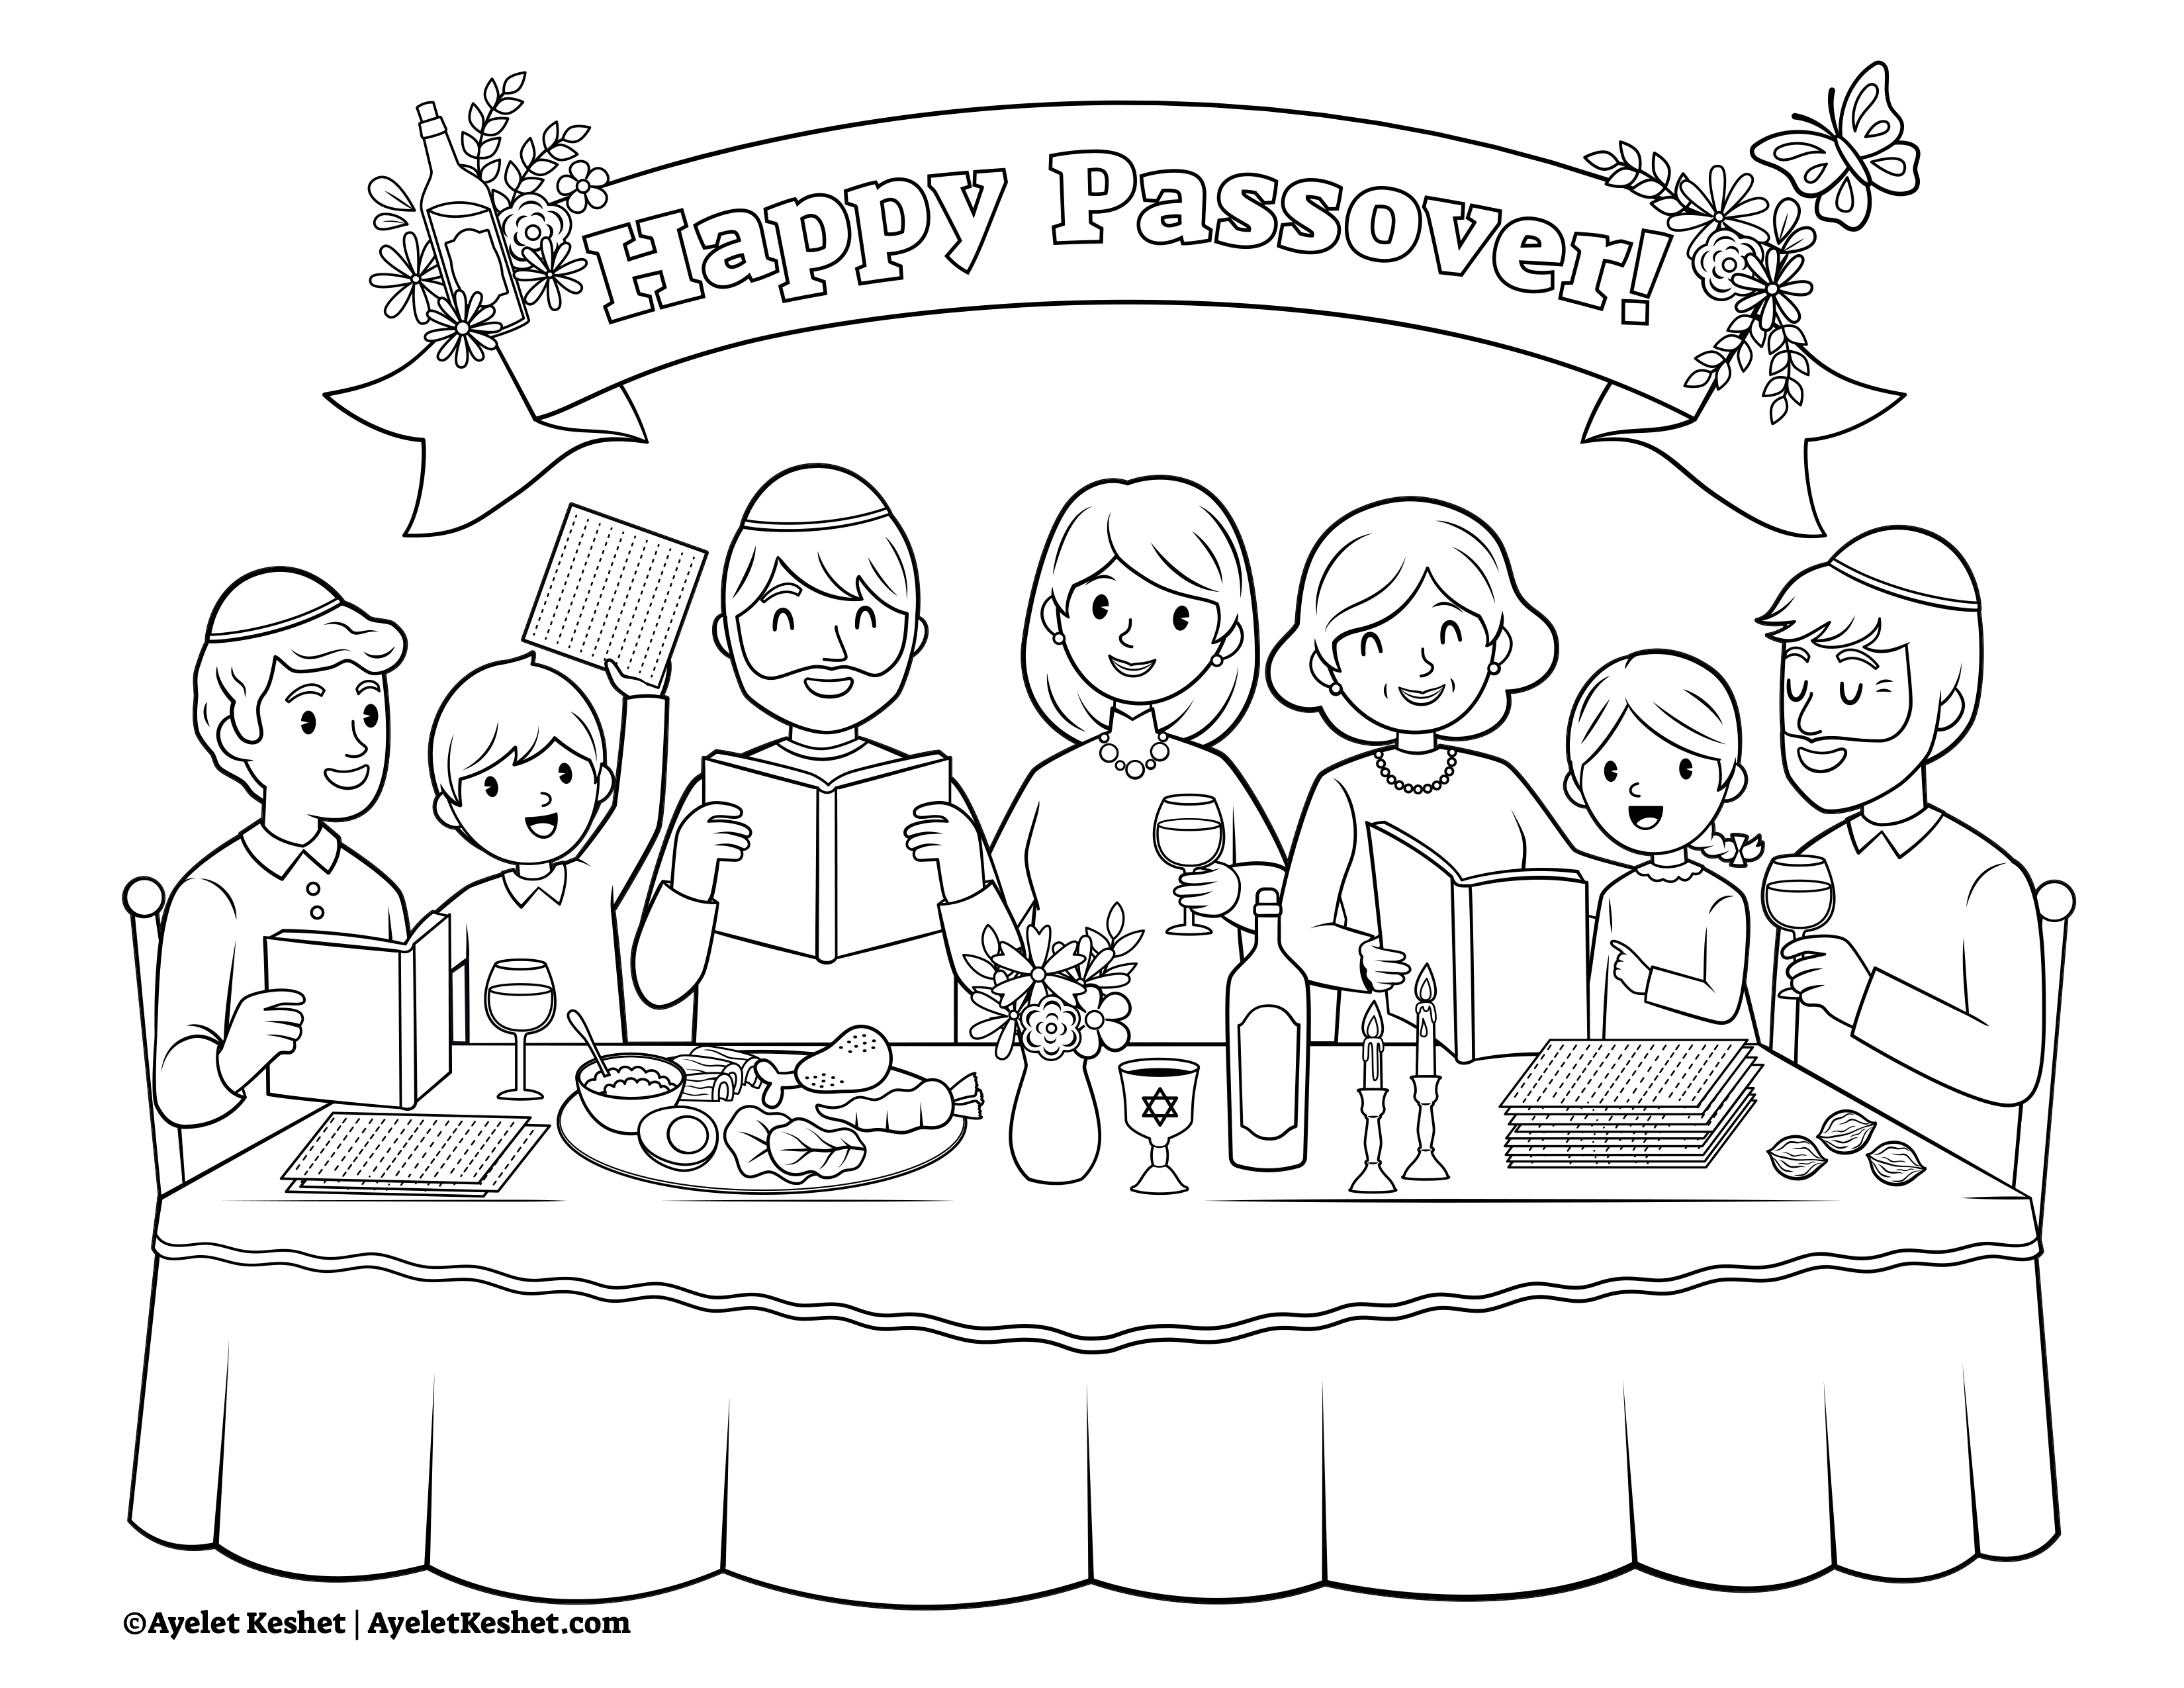 passover-coloring-pages-with-cute-illustrations-ayelet-keshet